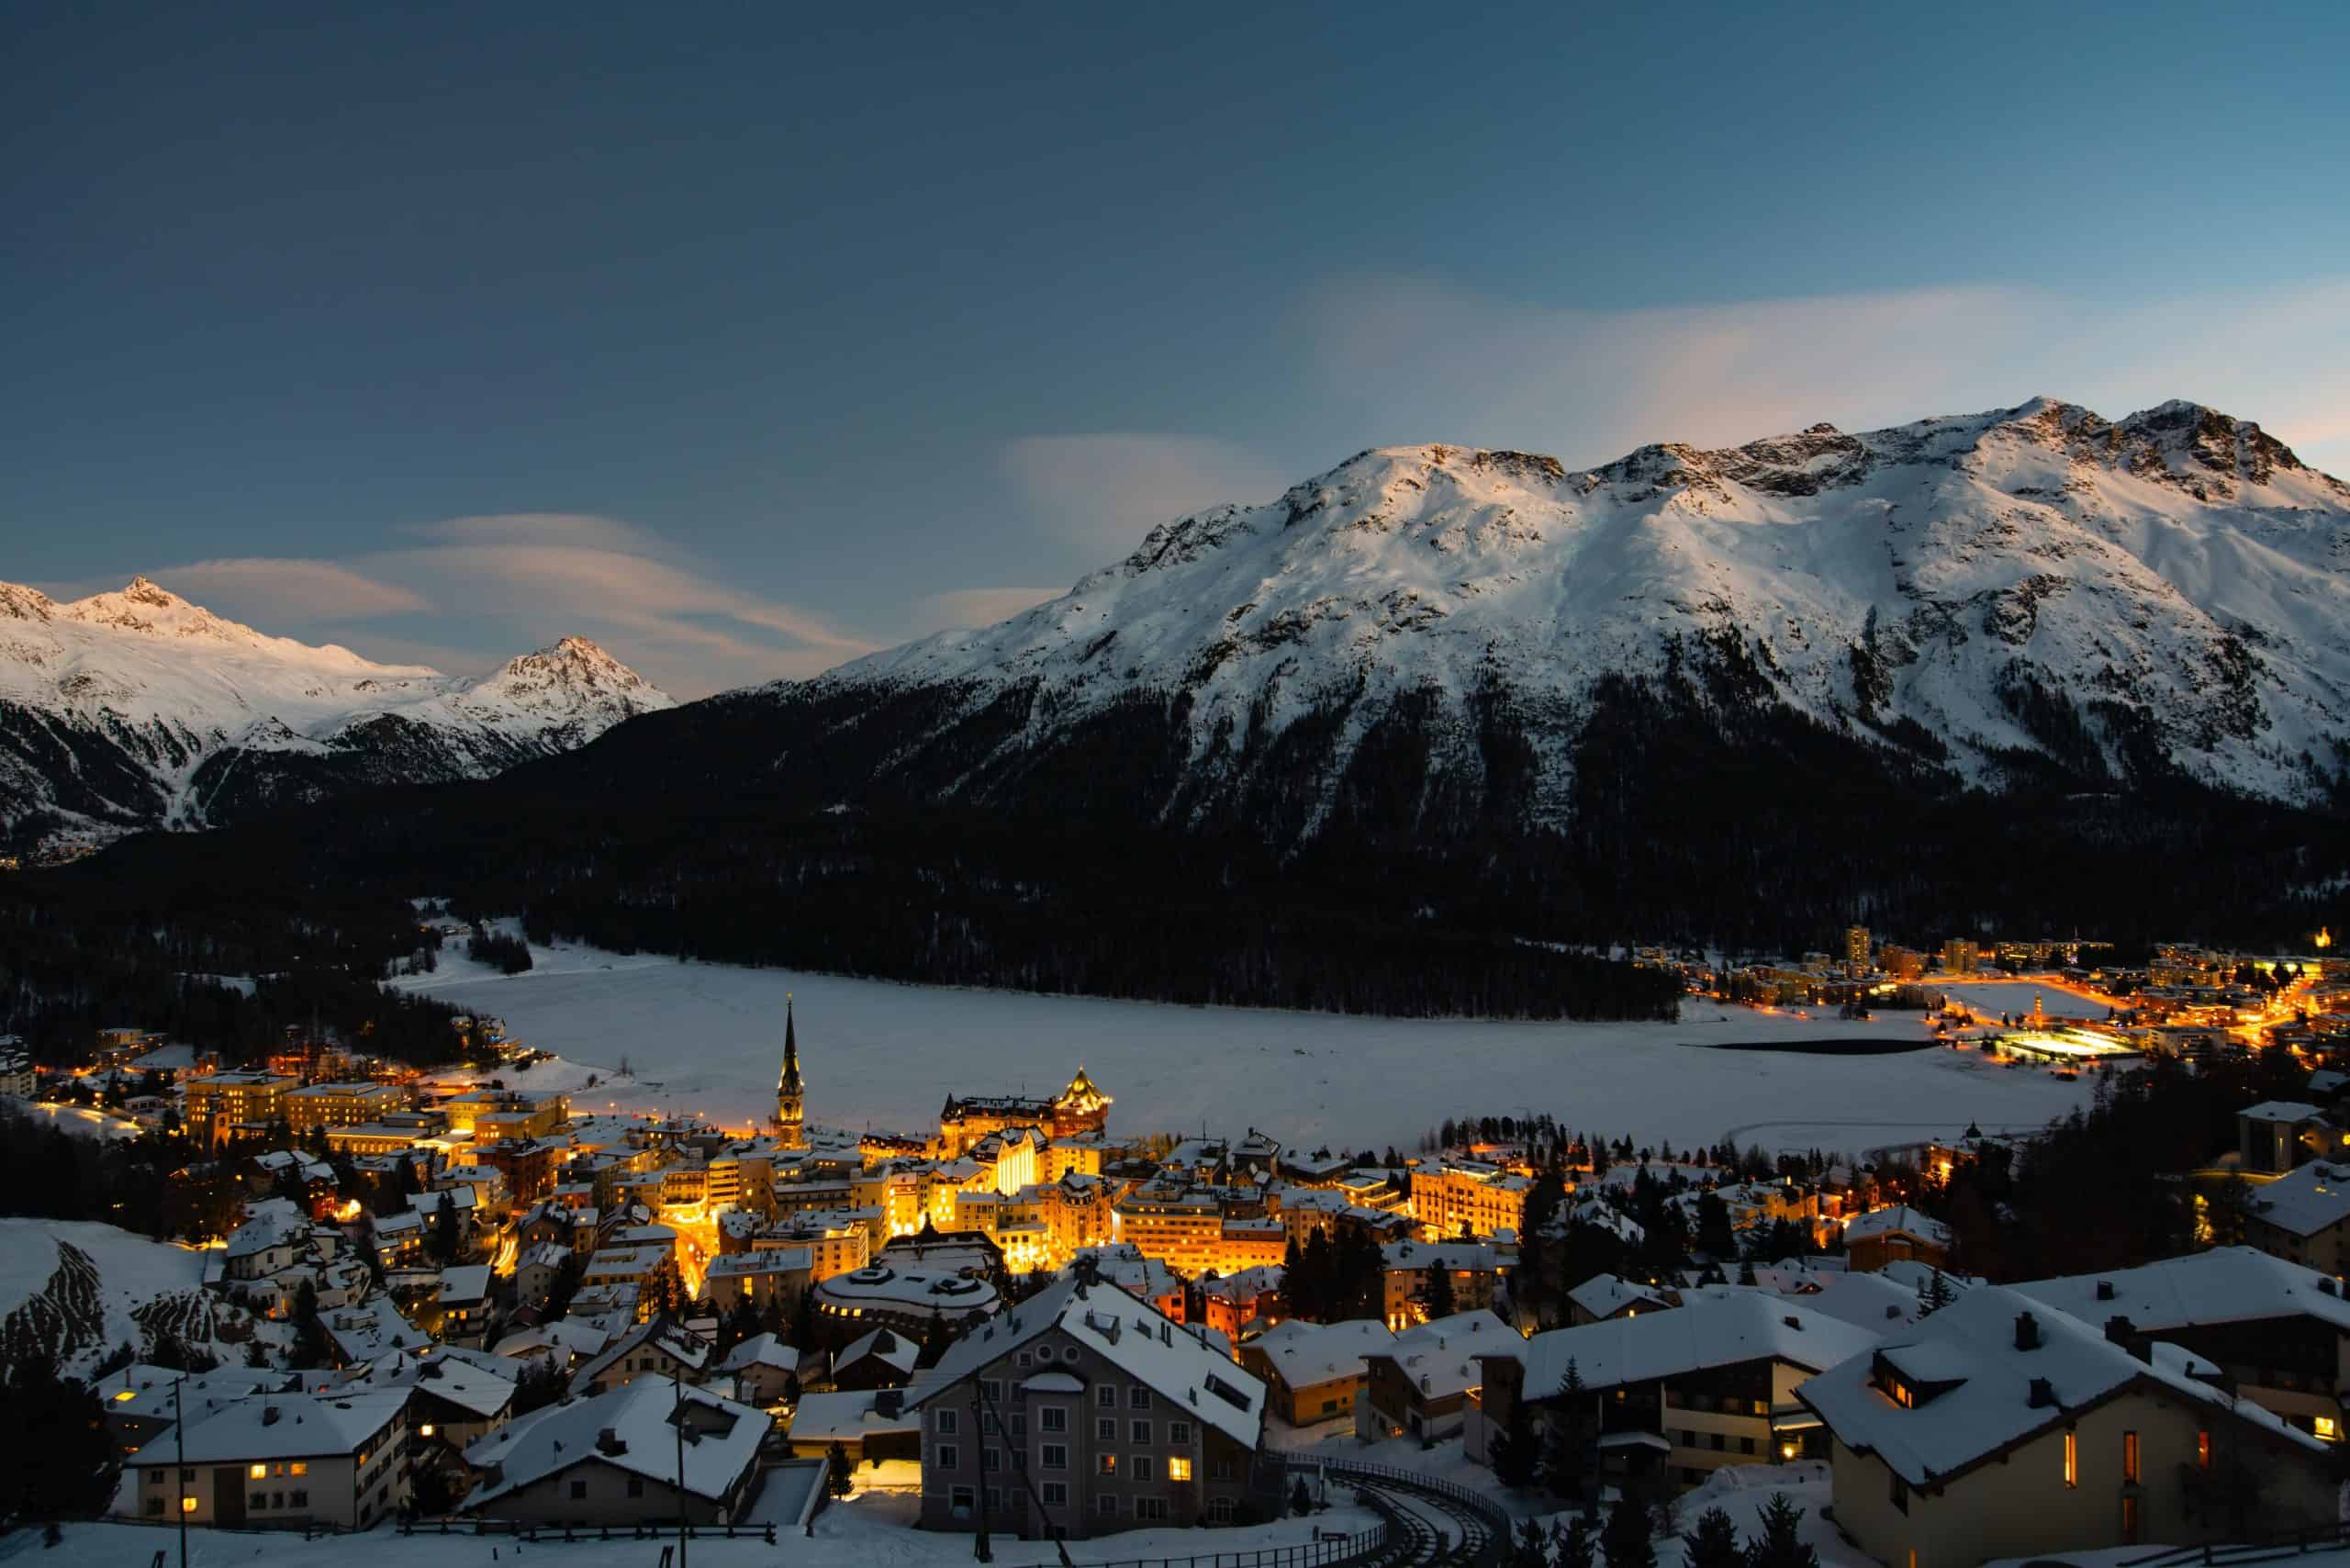 How To Get From Zurich Airport To St Moritz - All Possible Ways